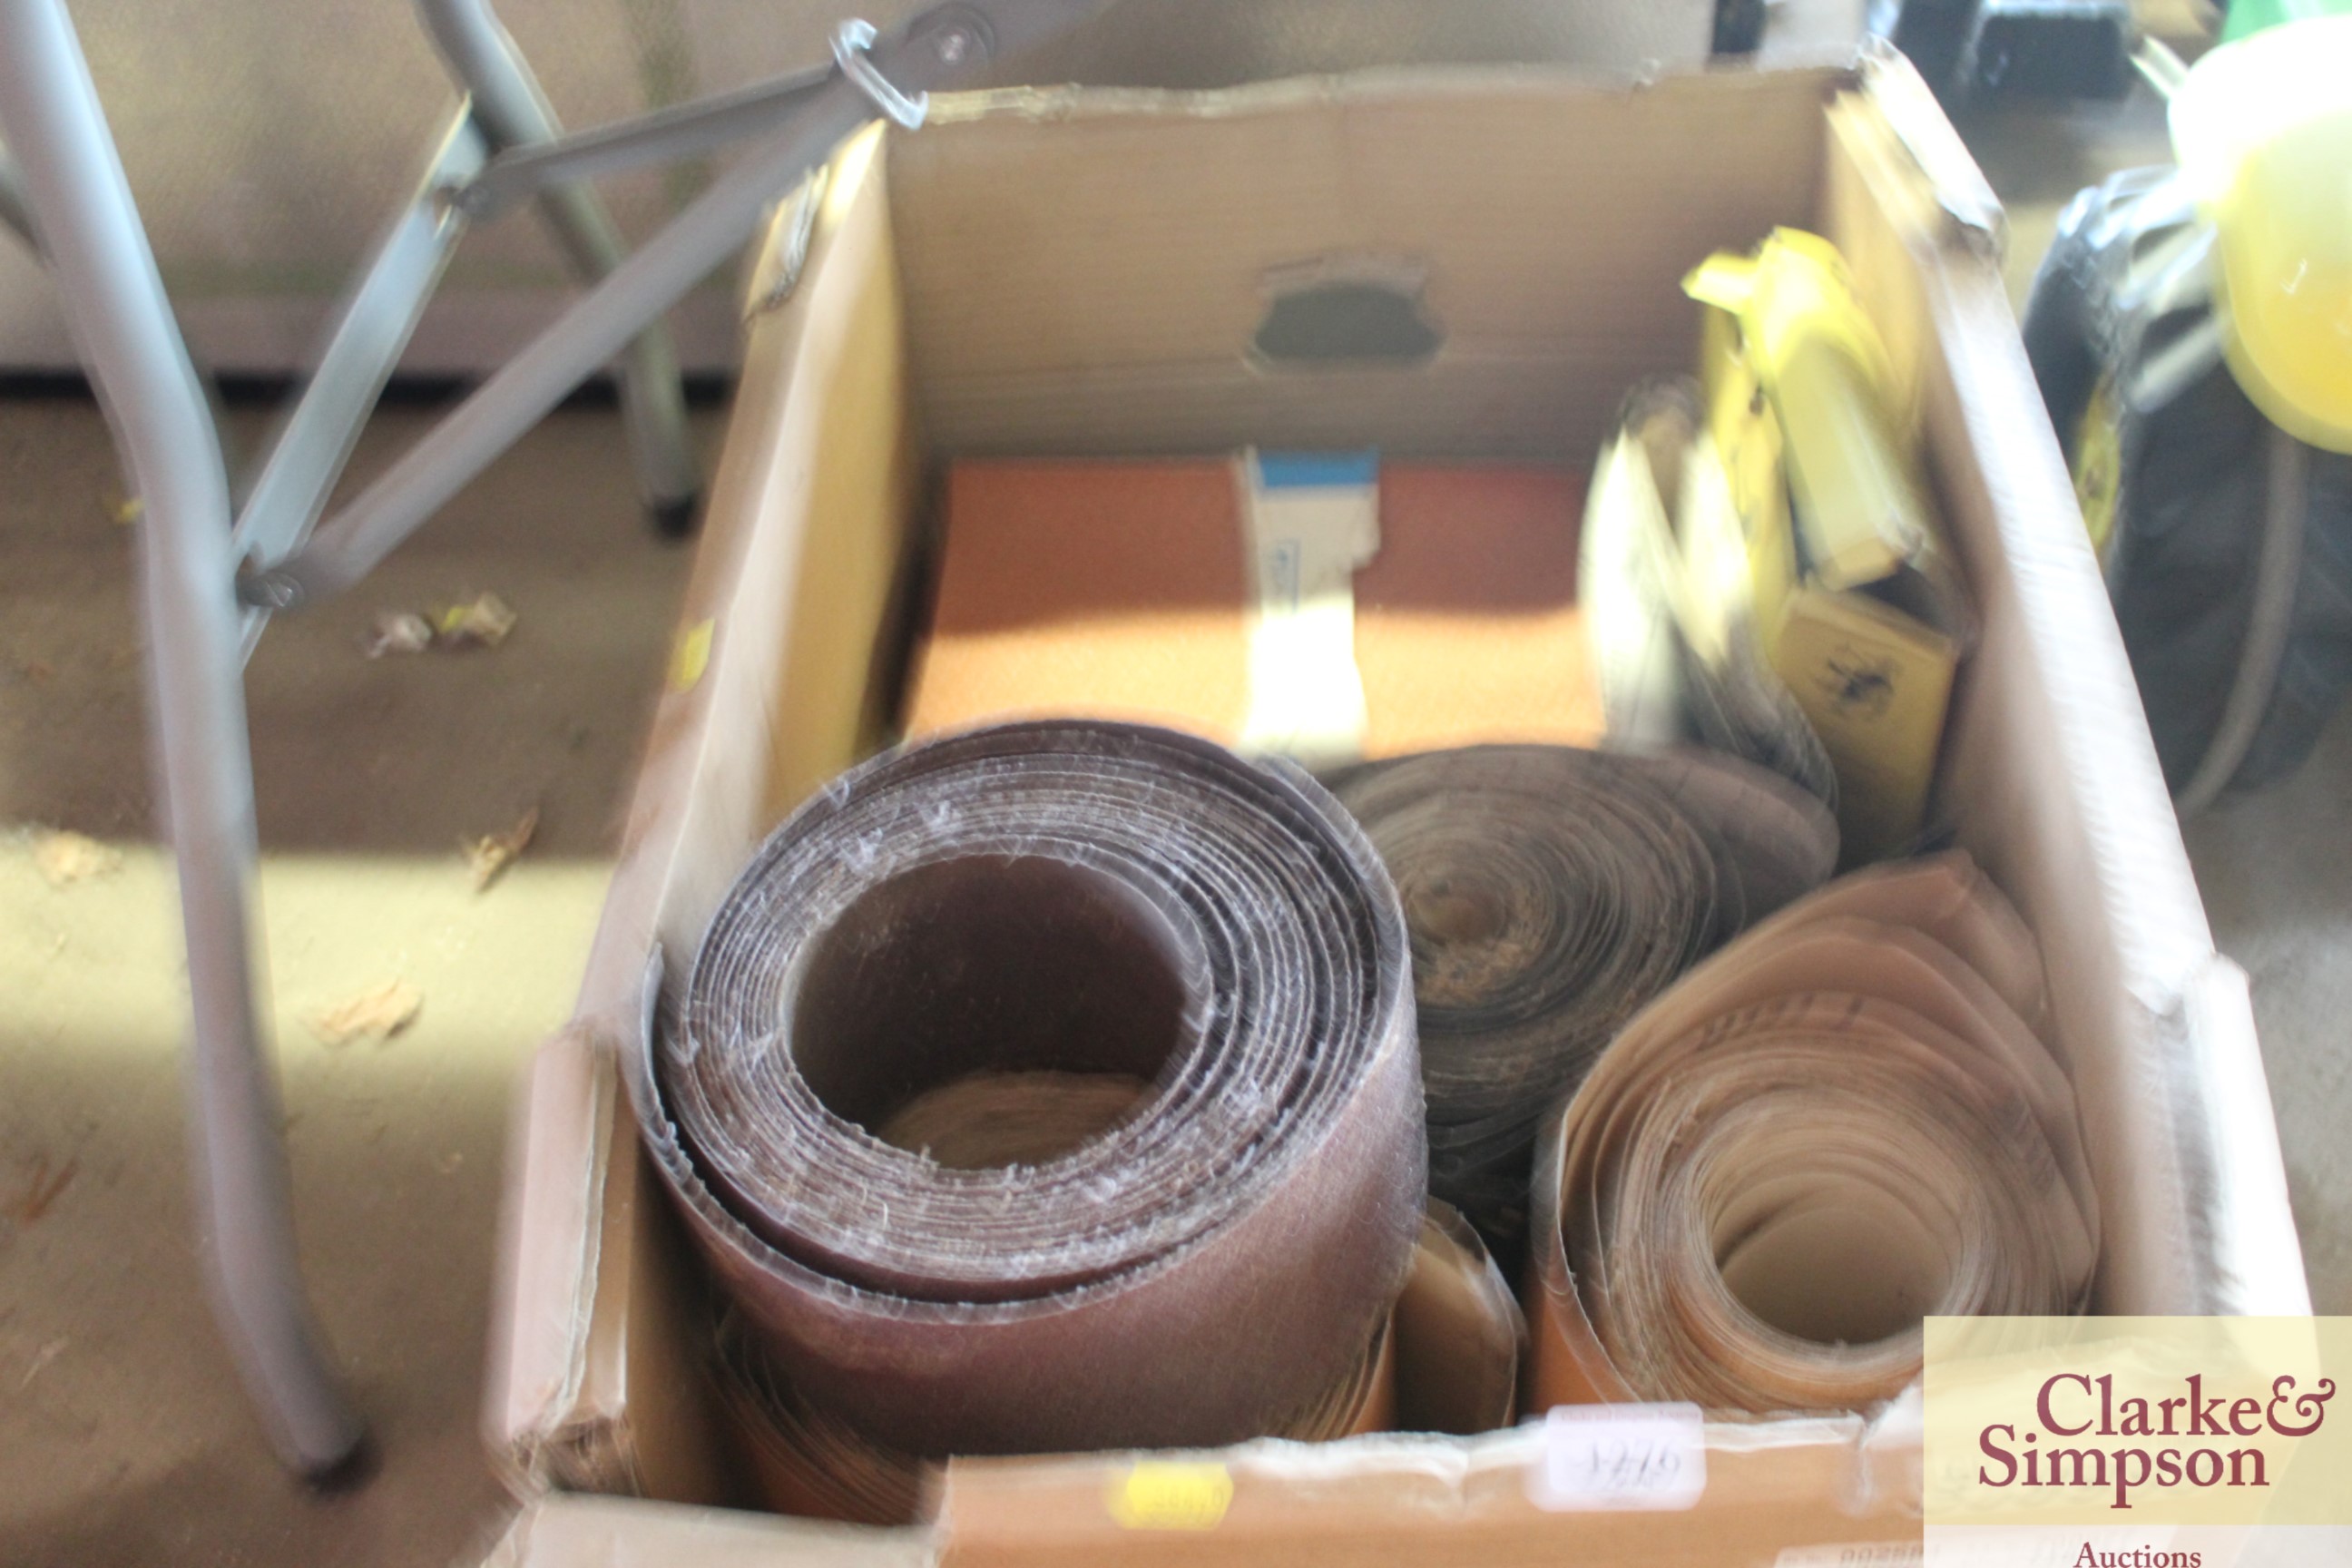 A box containing various rolls of sandpaper